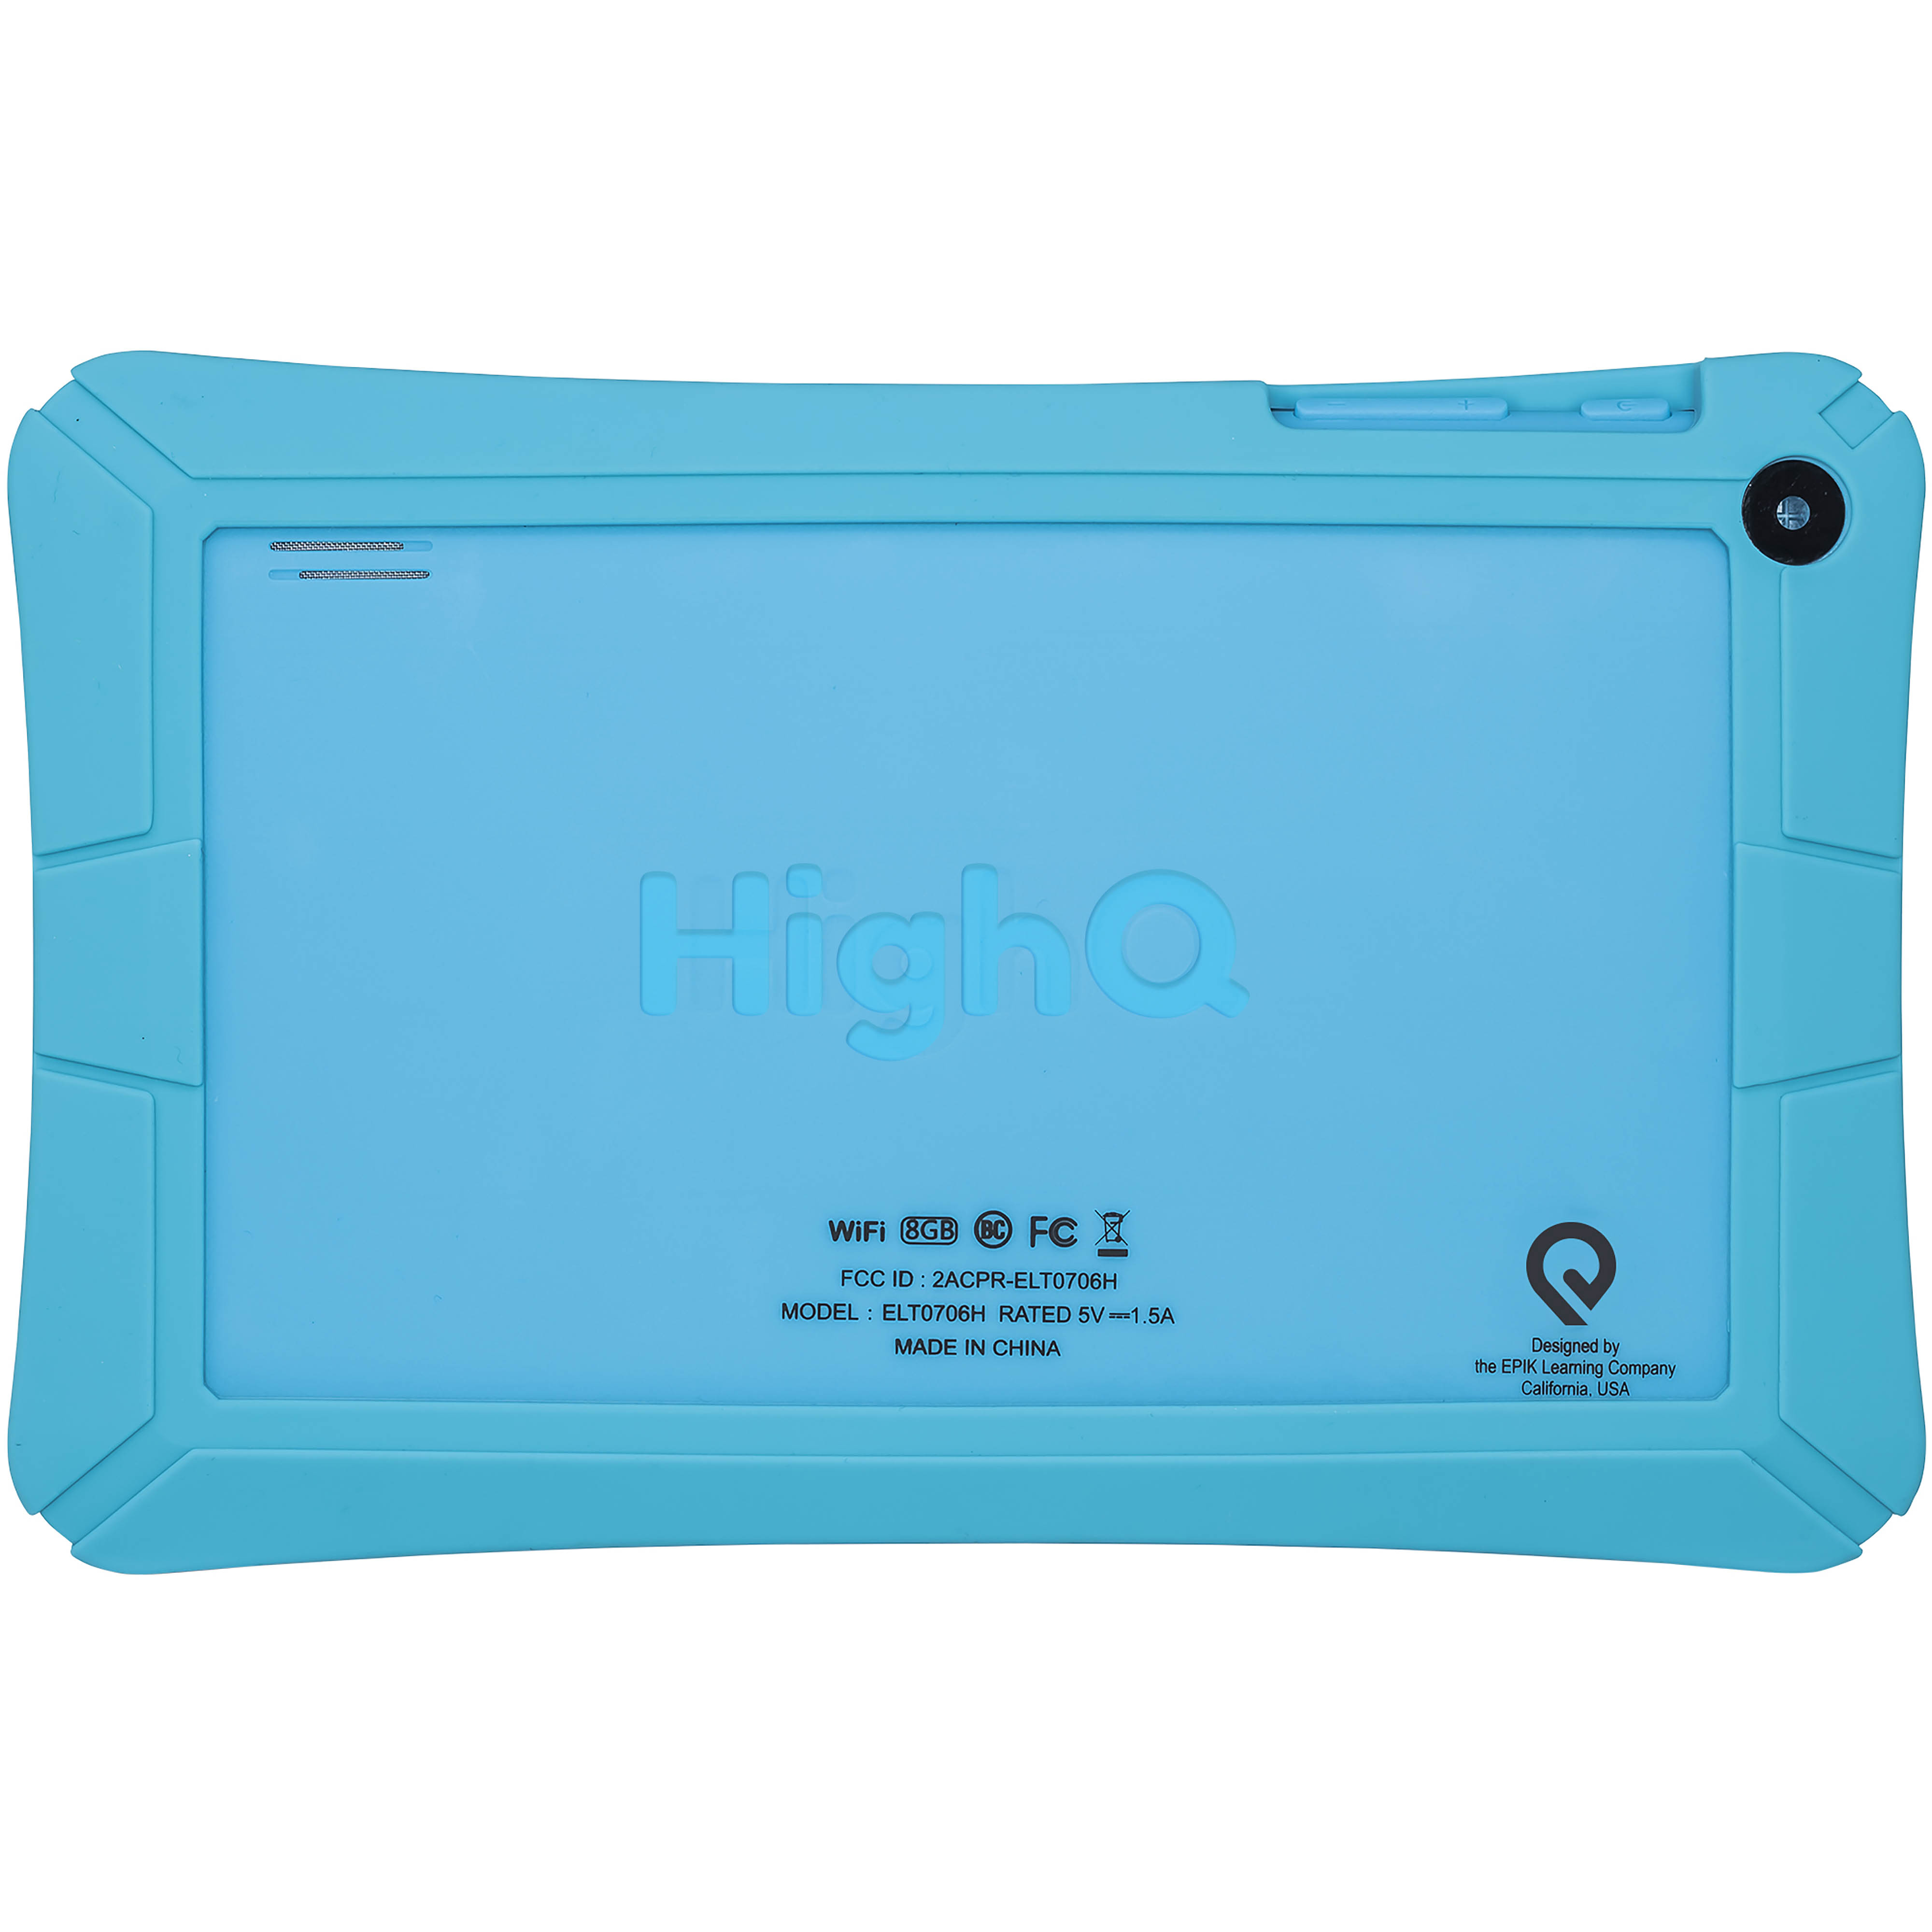 HighQ 7" Learning Tab Jr. featuring Kidomi, Gel Case Included, Quad Core Processor, 8GB Storage, Android 8.1 Go Edition, Dual Cameras, Kidomi Free Trial Included, Blue - image 3 of 8